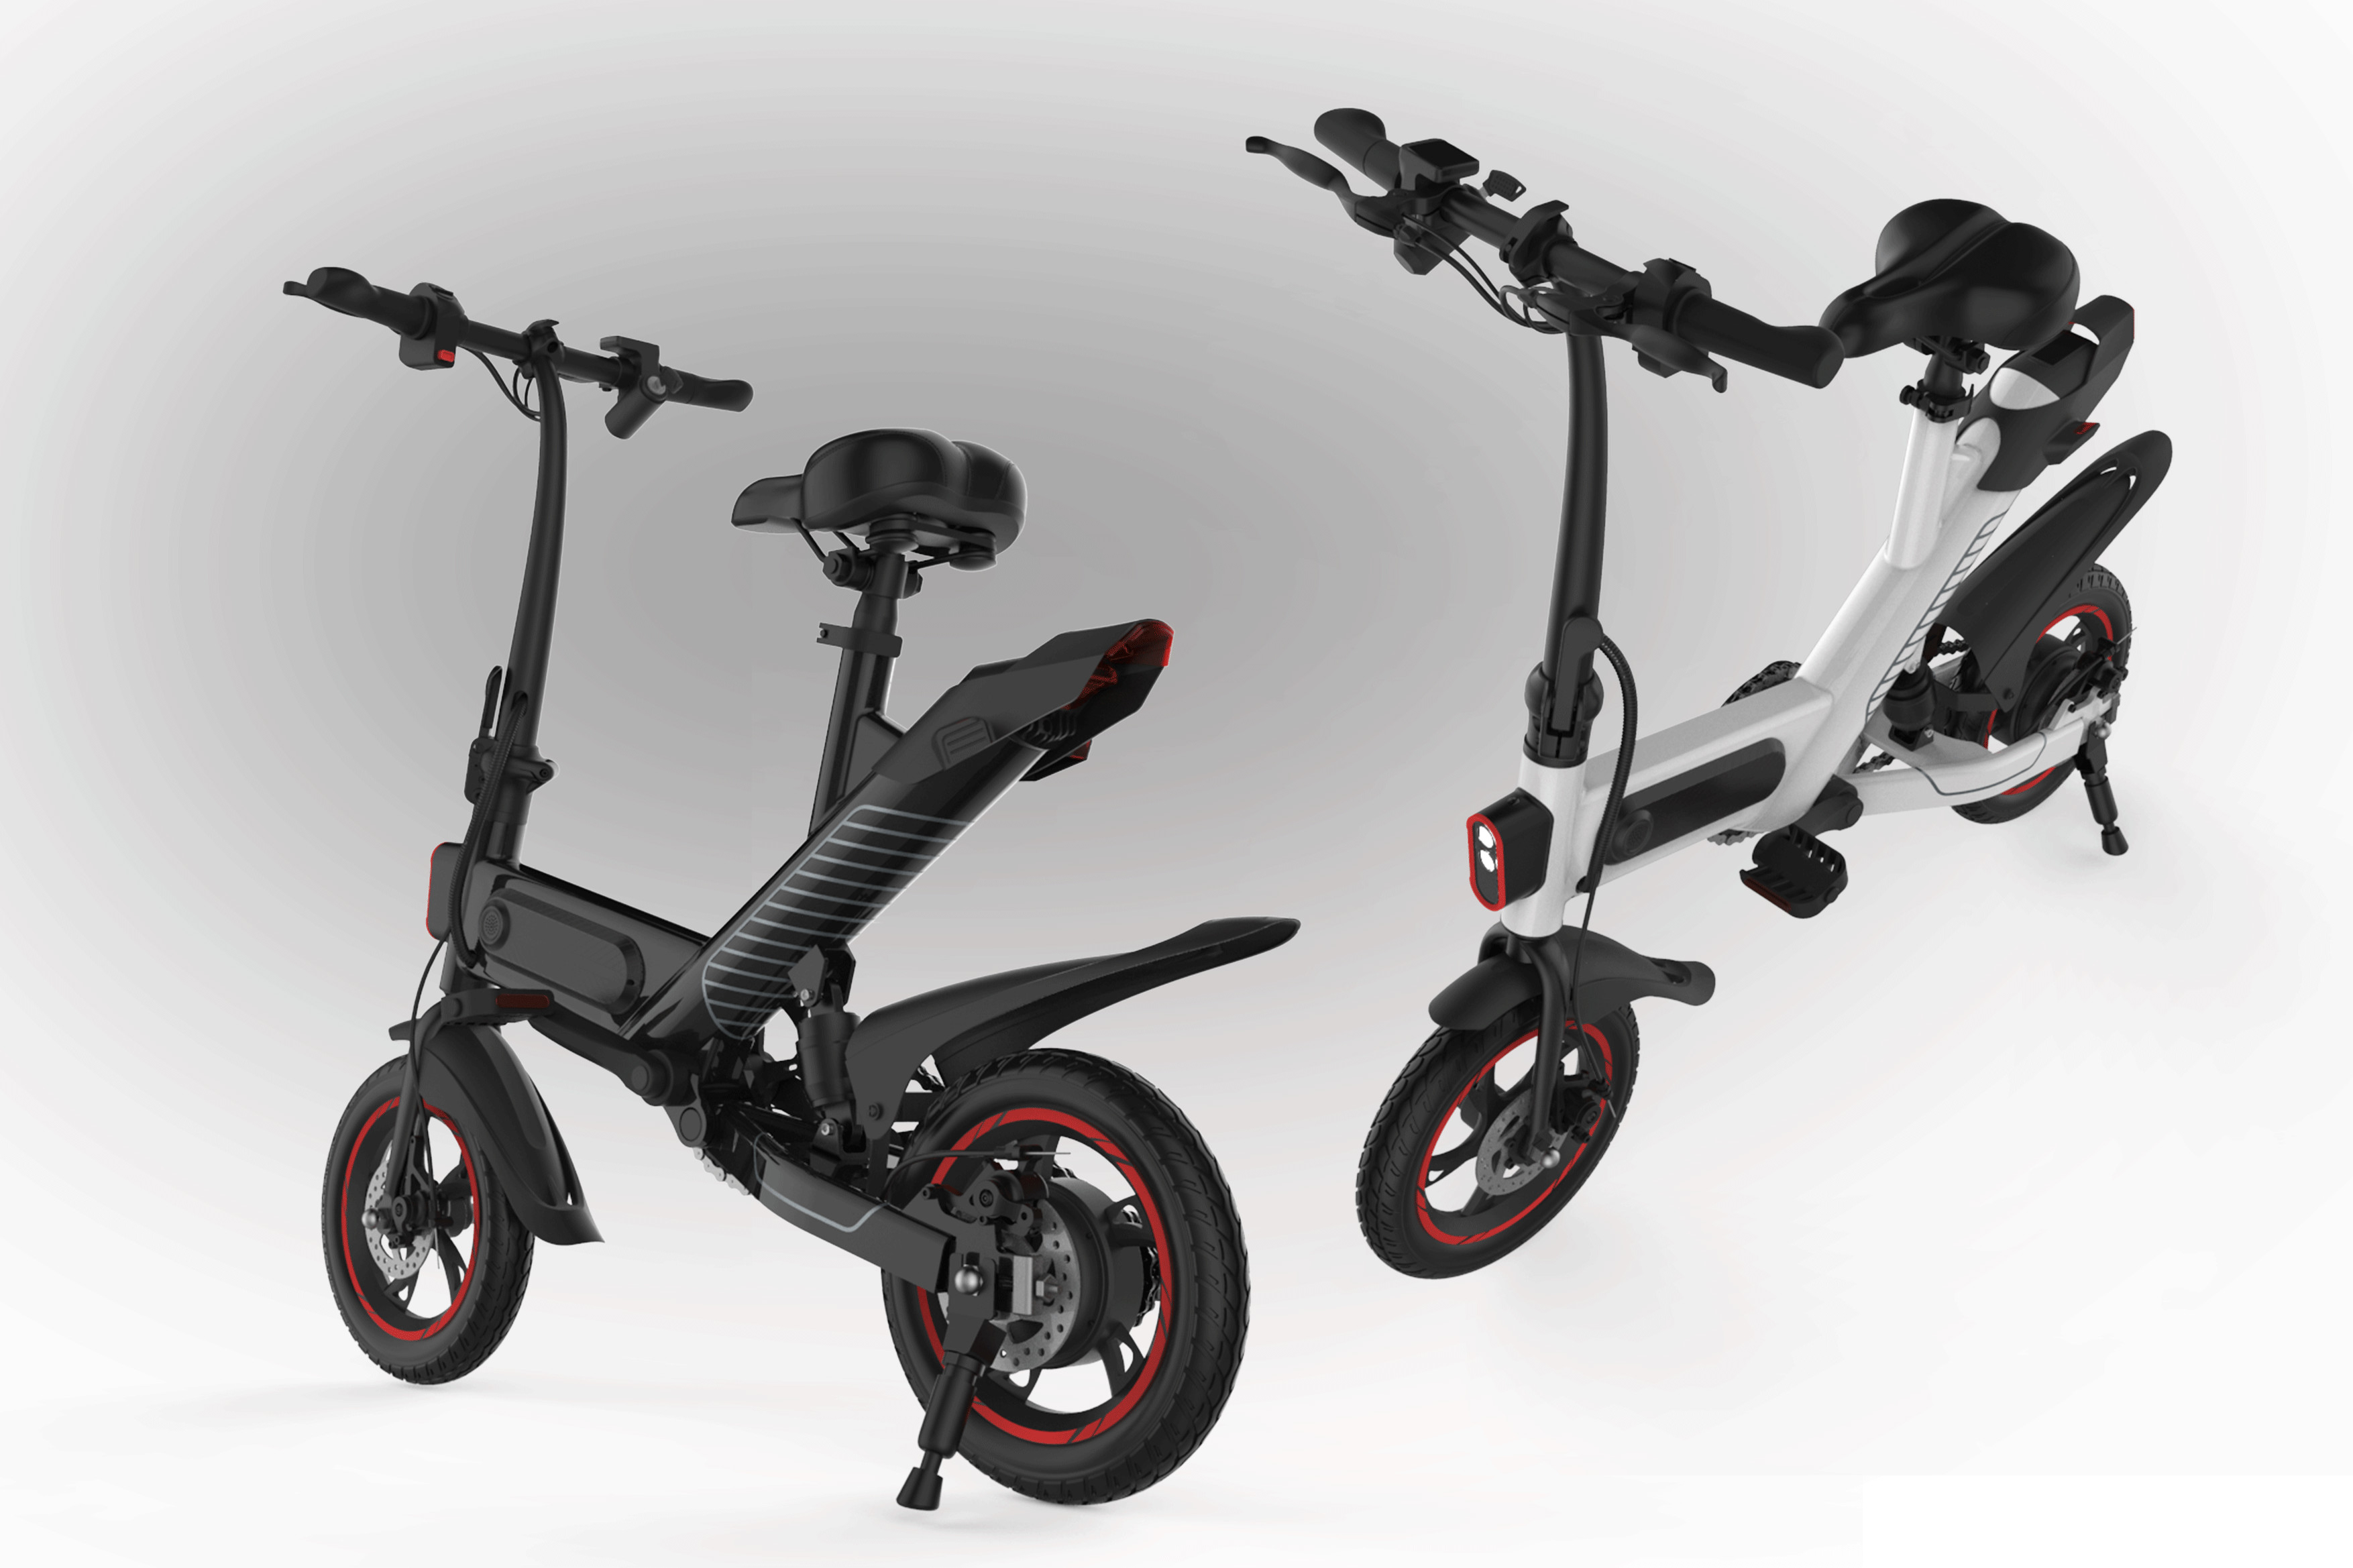  Portable Collapsible Electric Bike , Folding Electric Bicycle With Disc Break System Manufactures